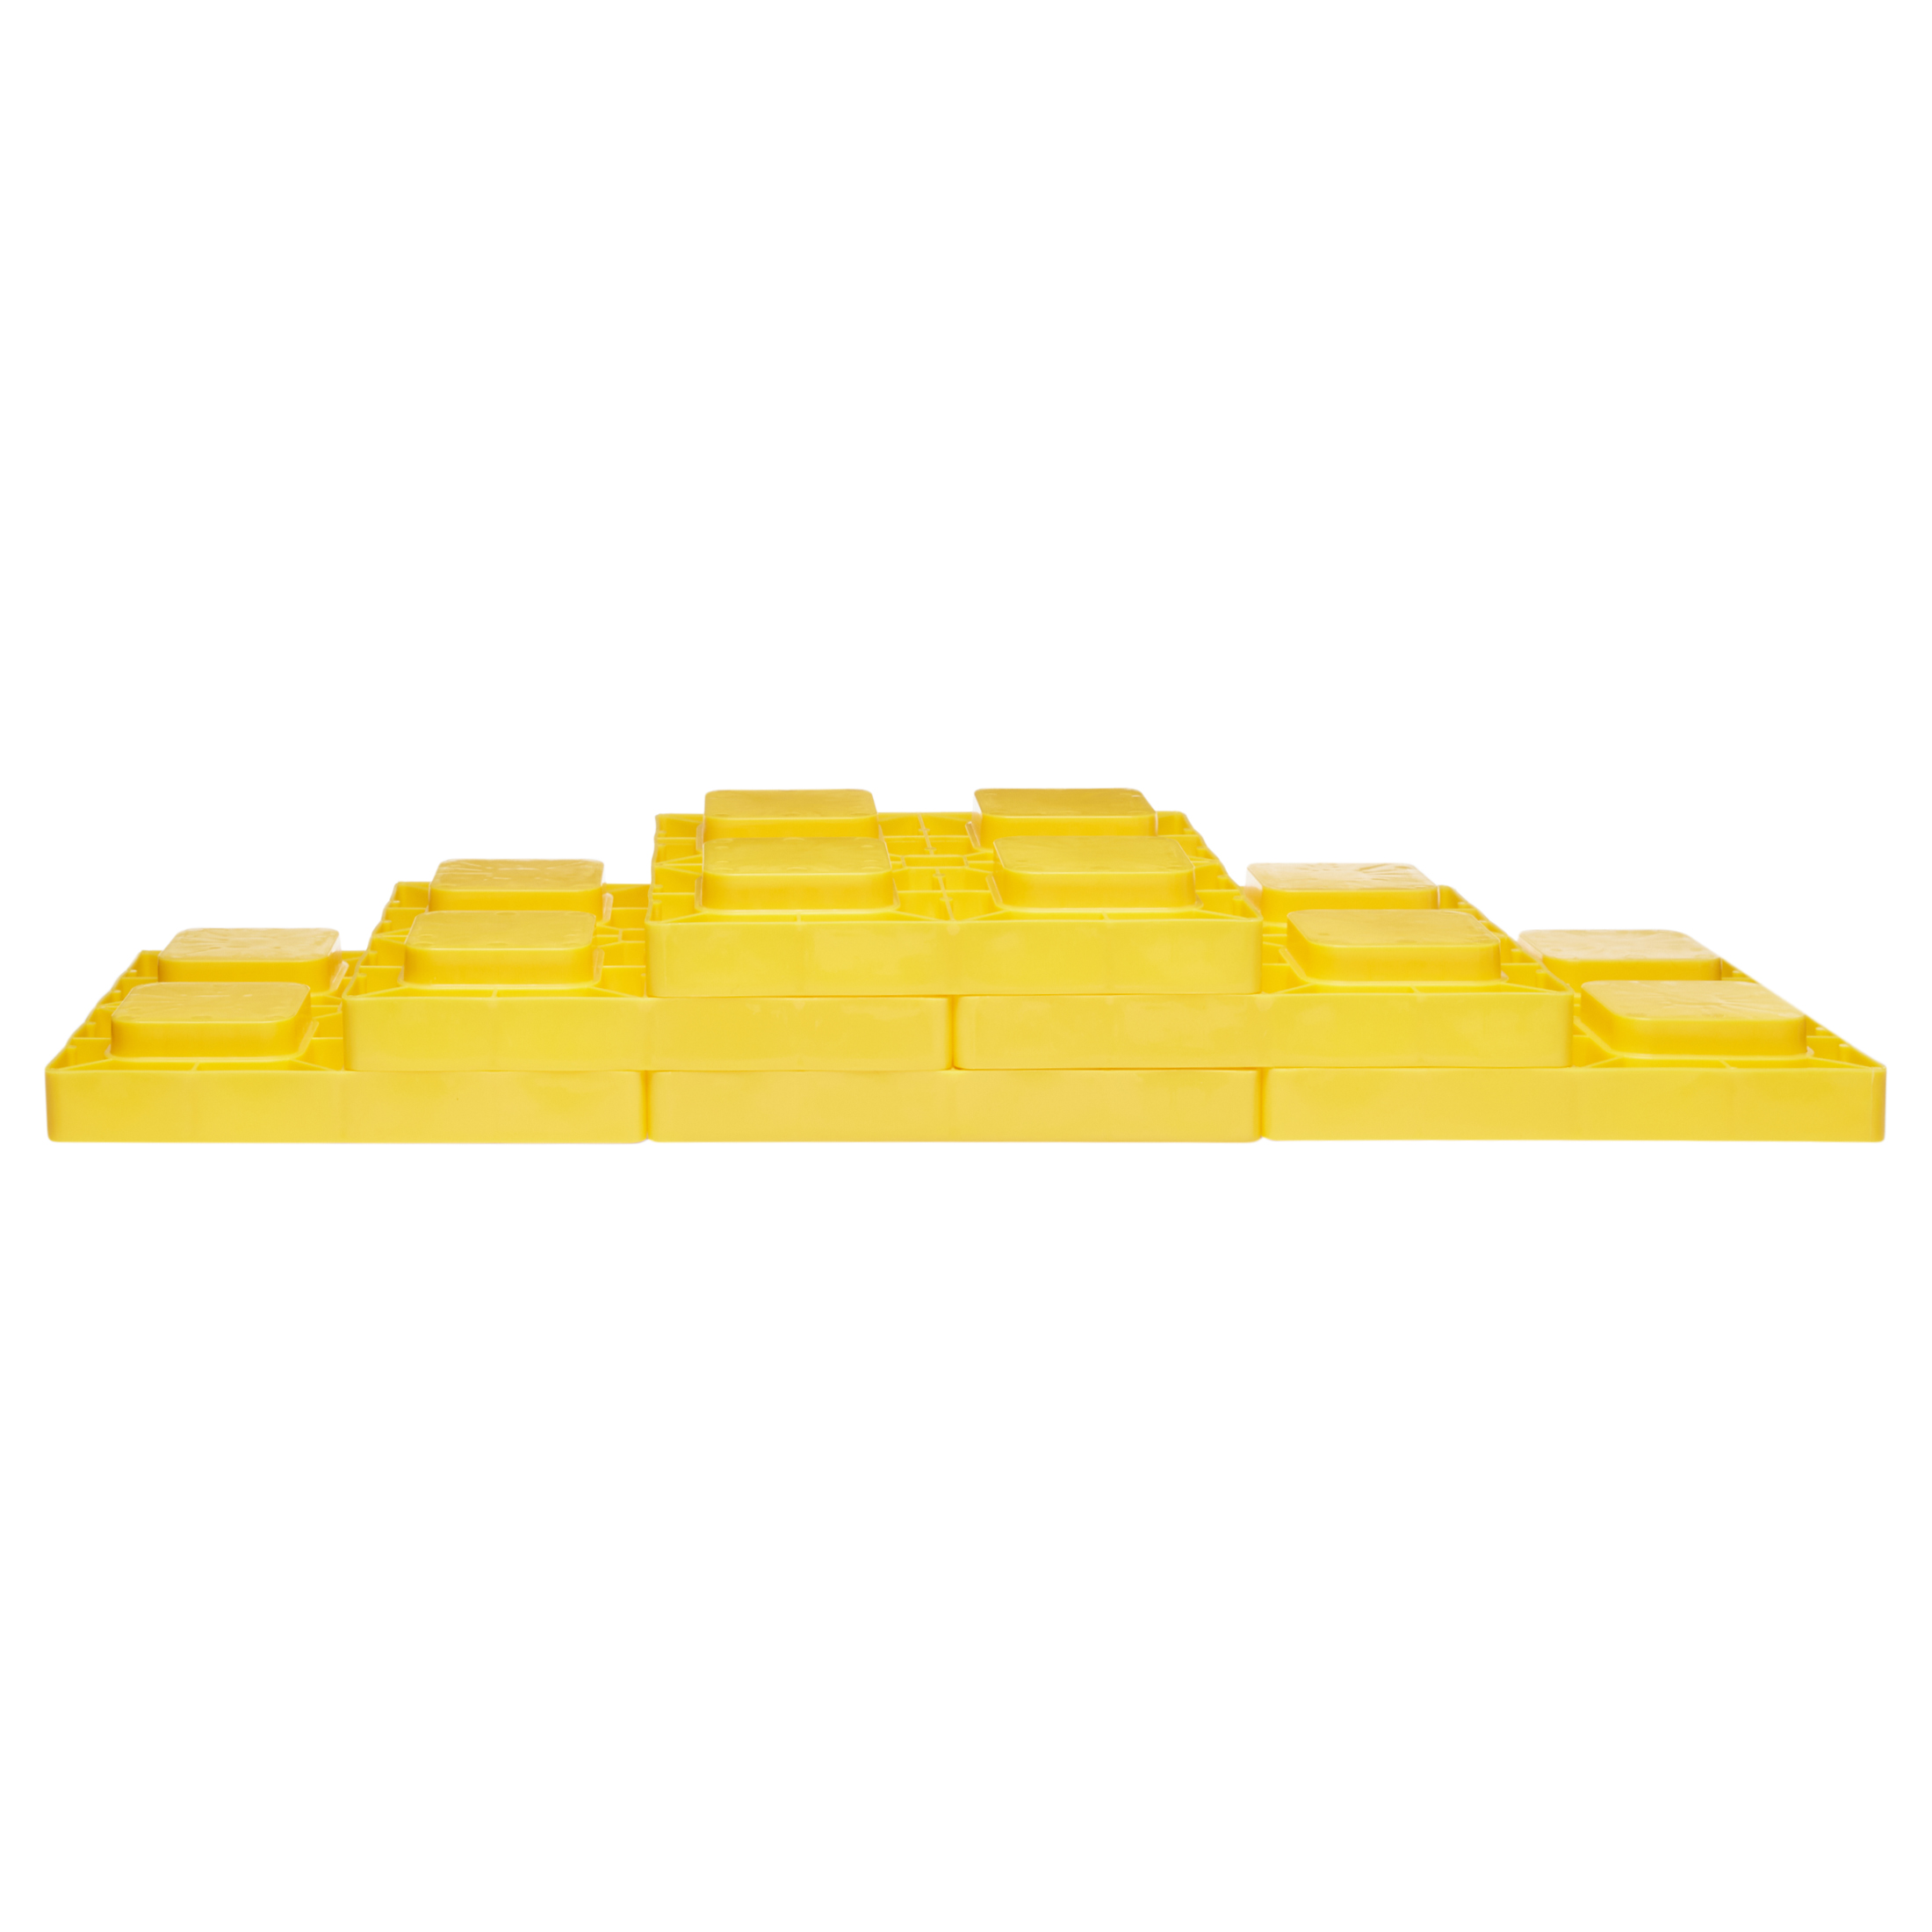 Camco Heavy Duty Leveling Blocks | 10 Pack | Yellow Resin Plastic (44505) - image 4 of 5